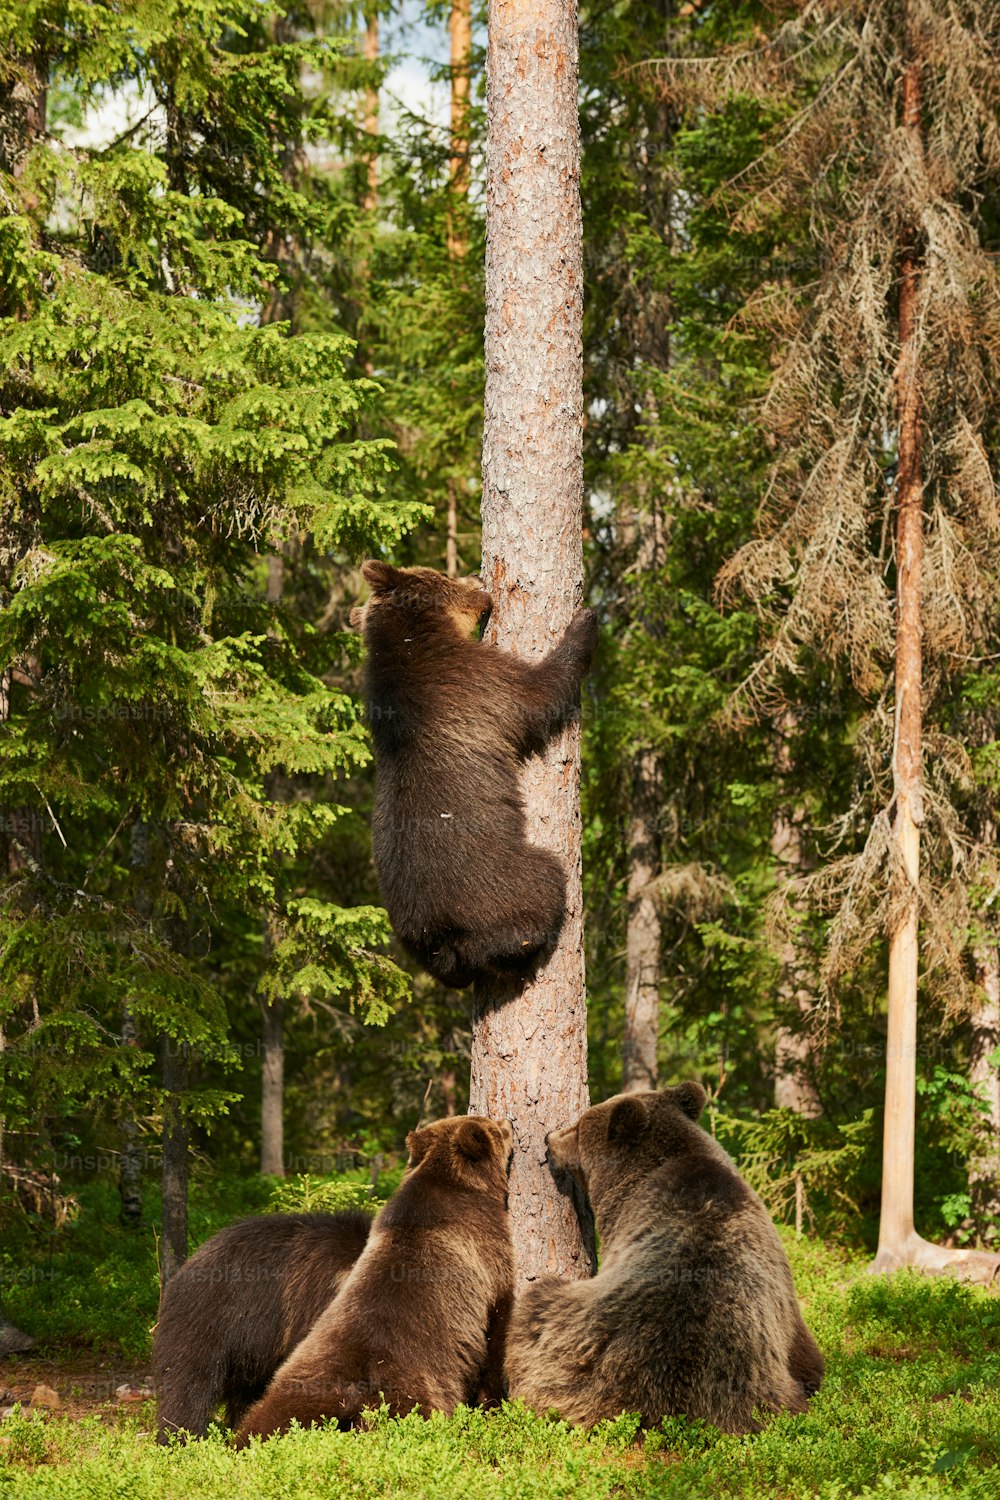 Female brown bear with three big puppies, one of which climbs a tree